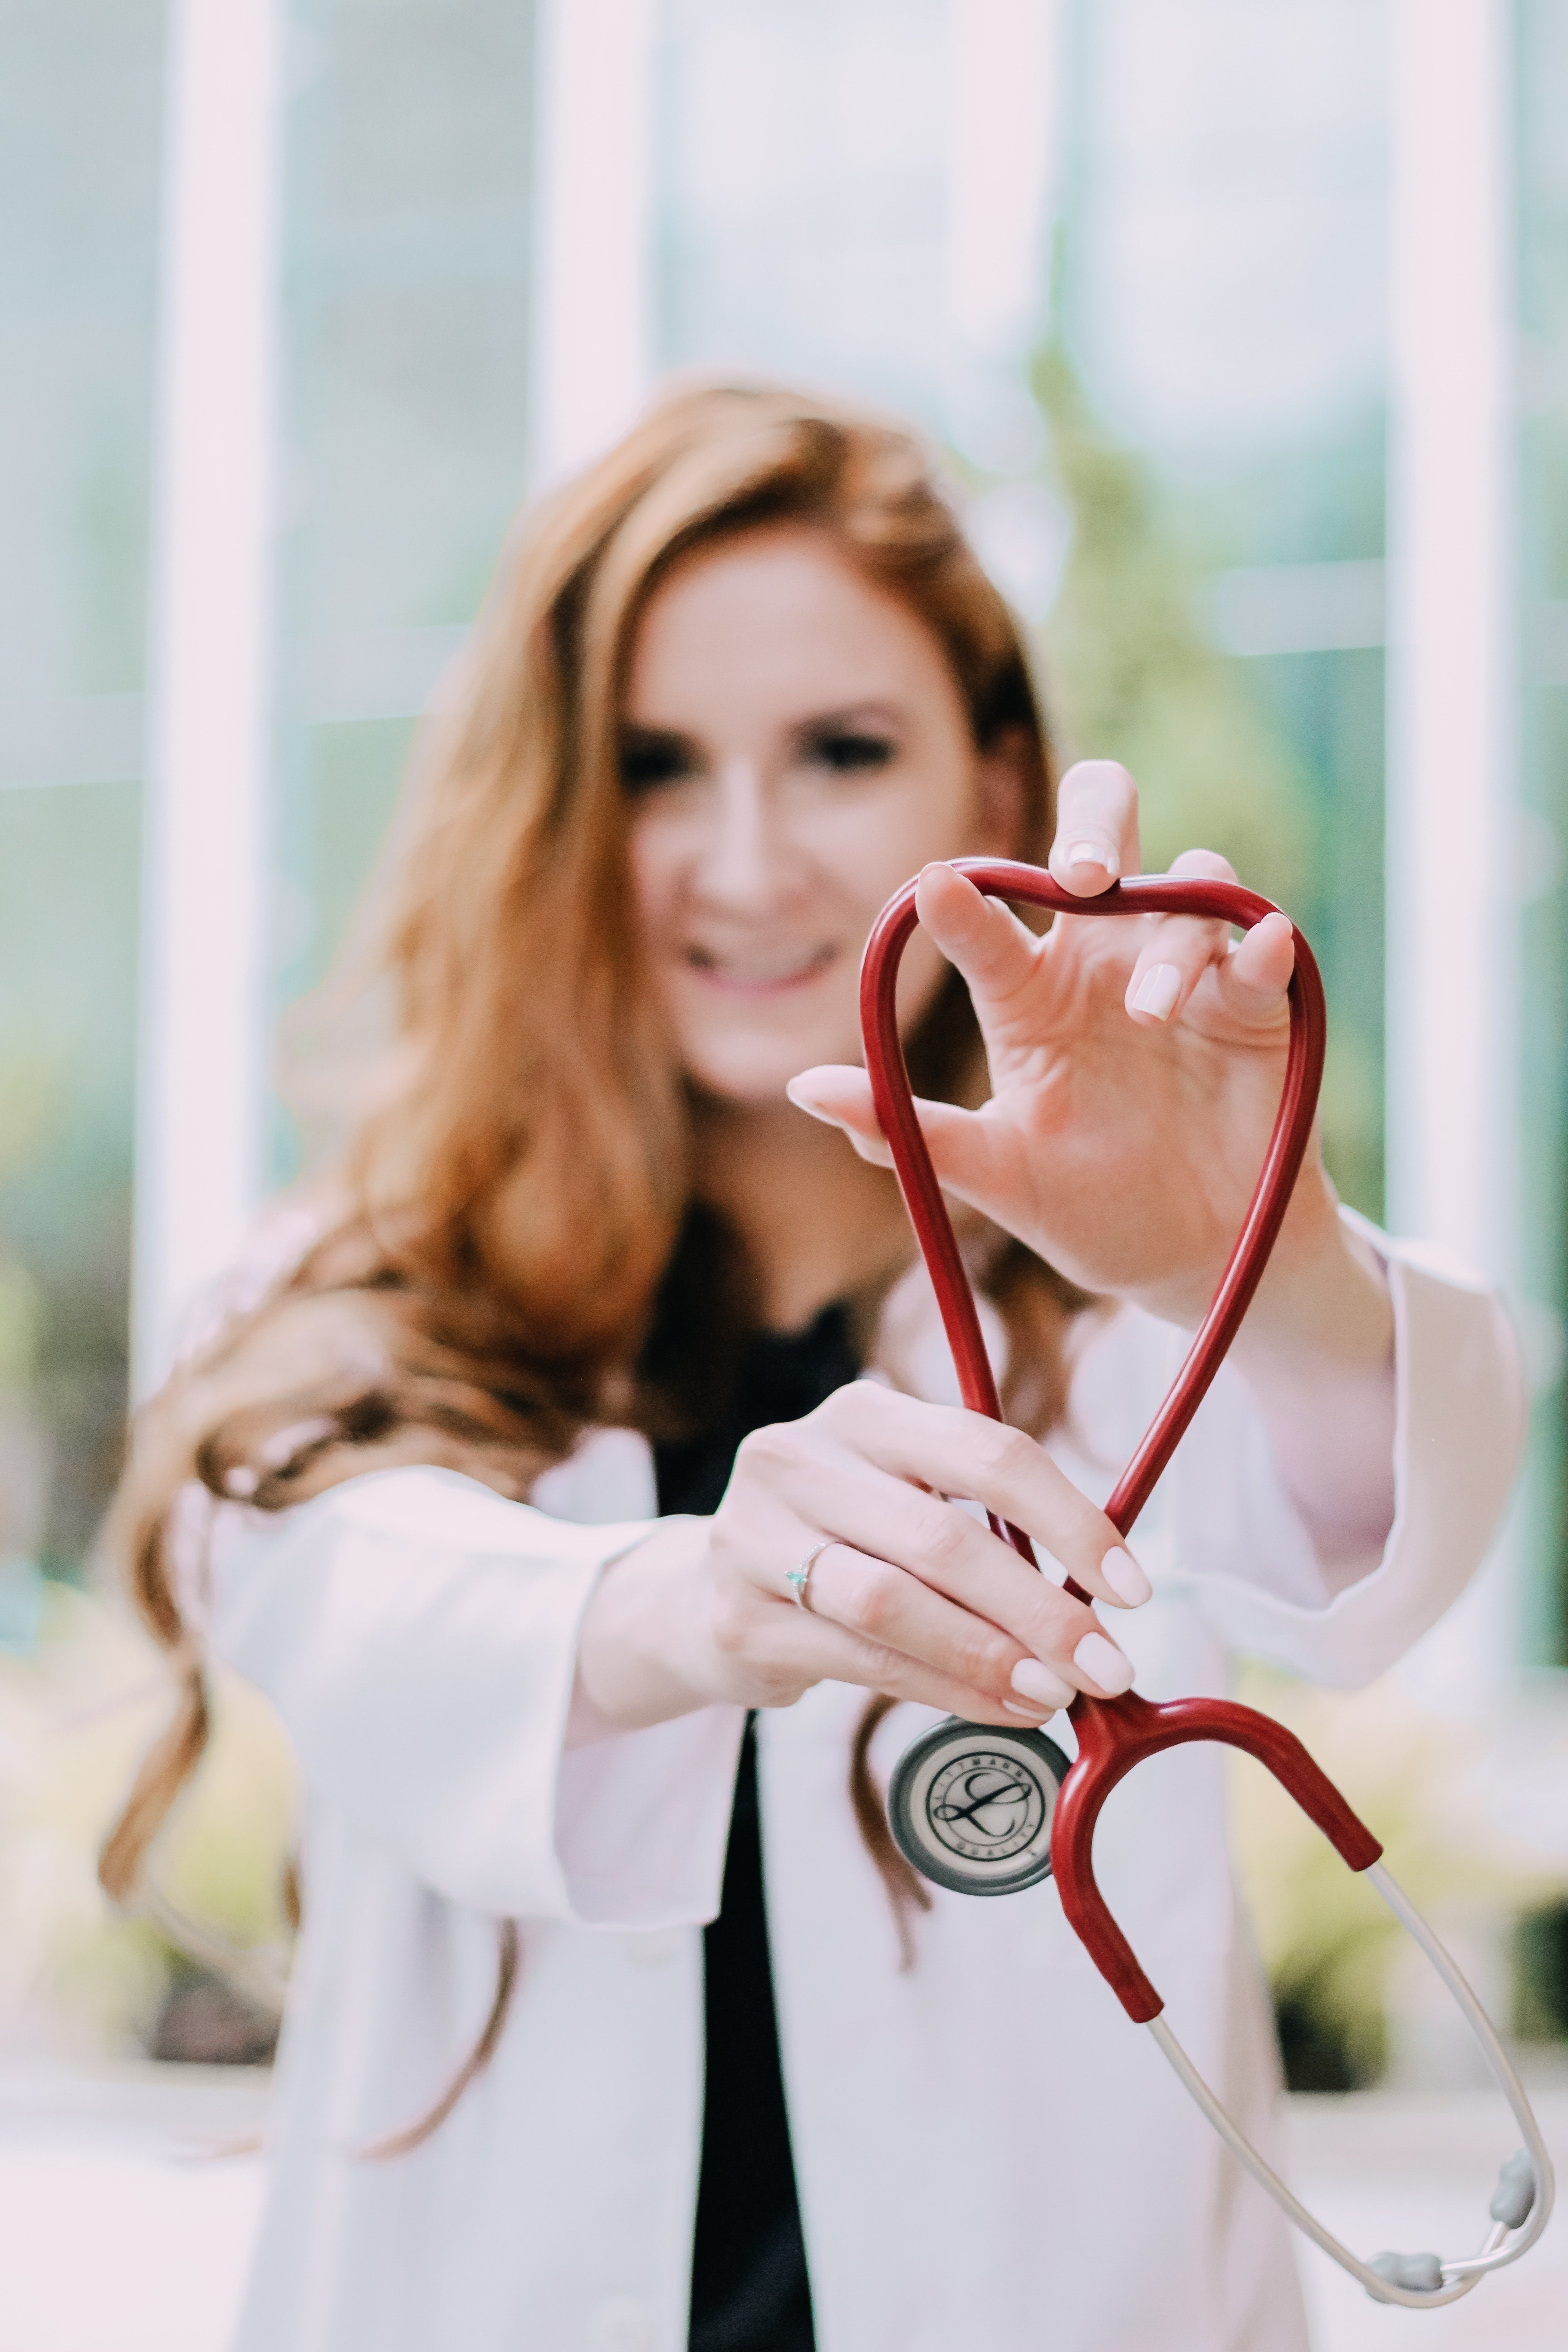 White female doctor holding a red stethoscope towards the camera. The stethoscope hose outlines a heart shape.